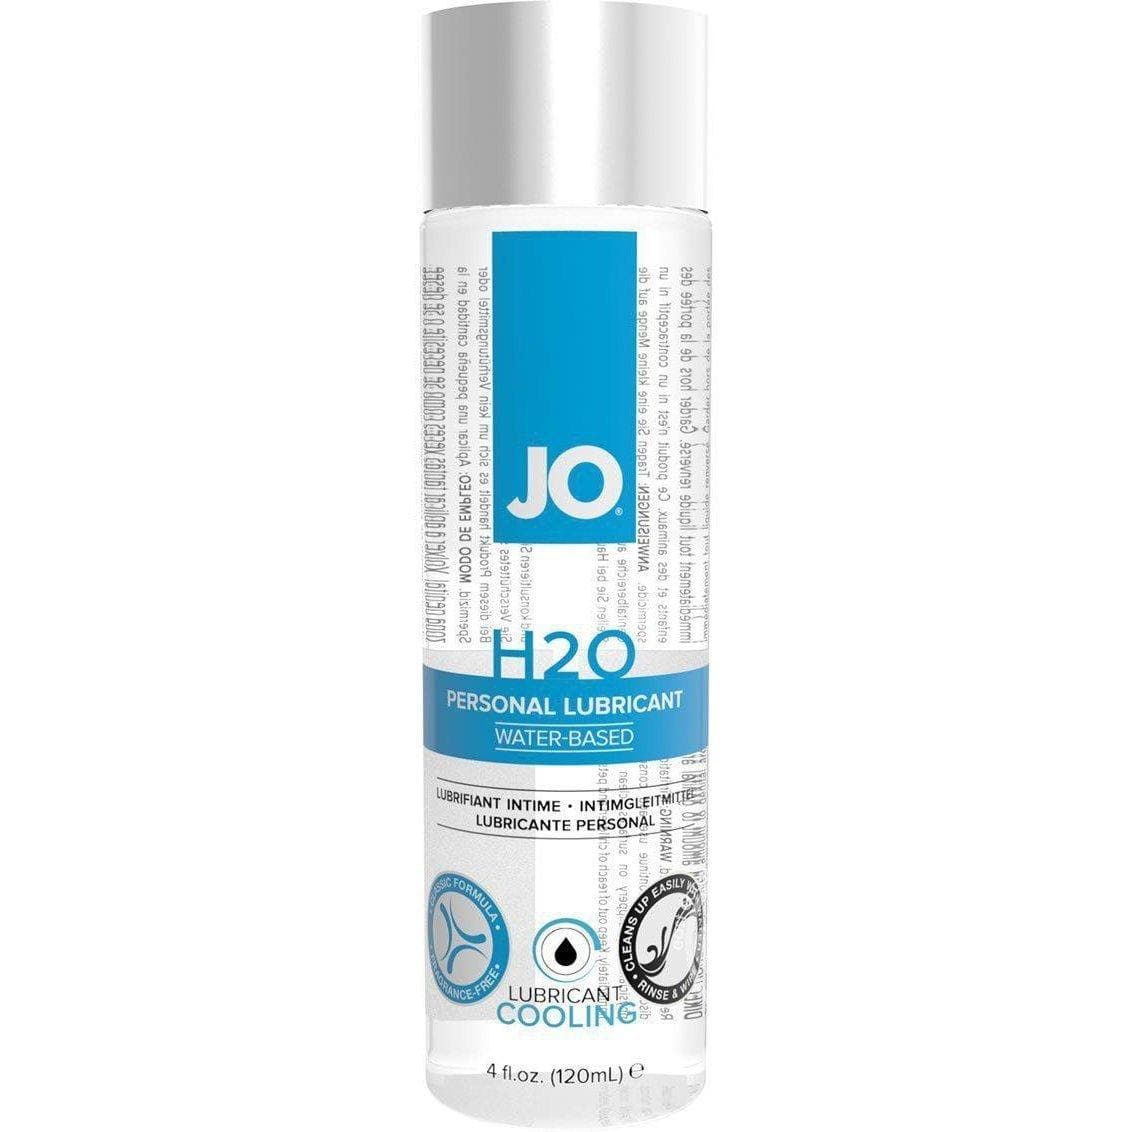 JO H2O Cool Water Based Lubricant with Cooling & Tingling Sensations - Romantic Blessings